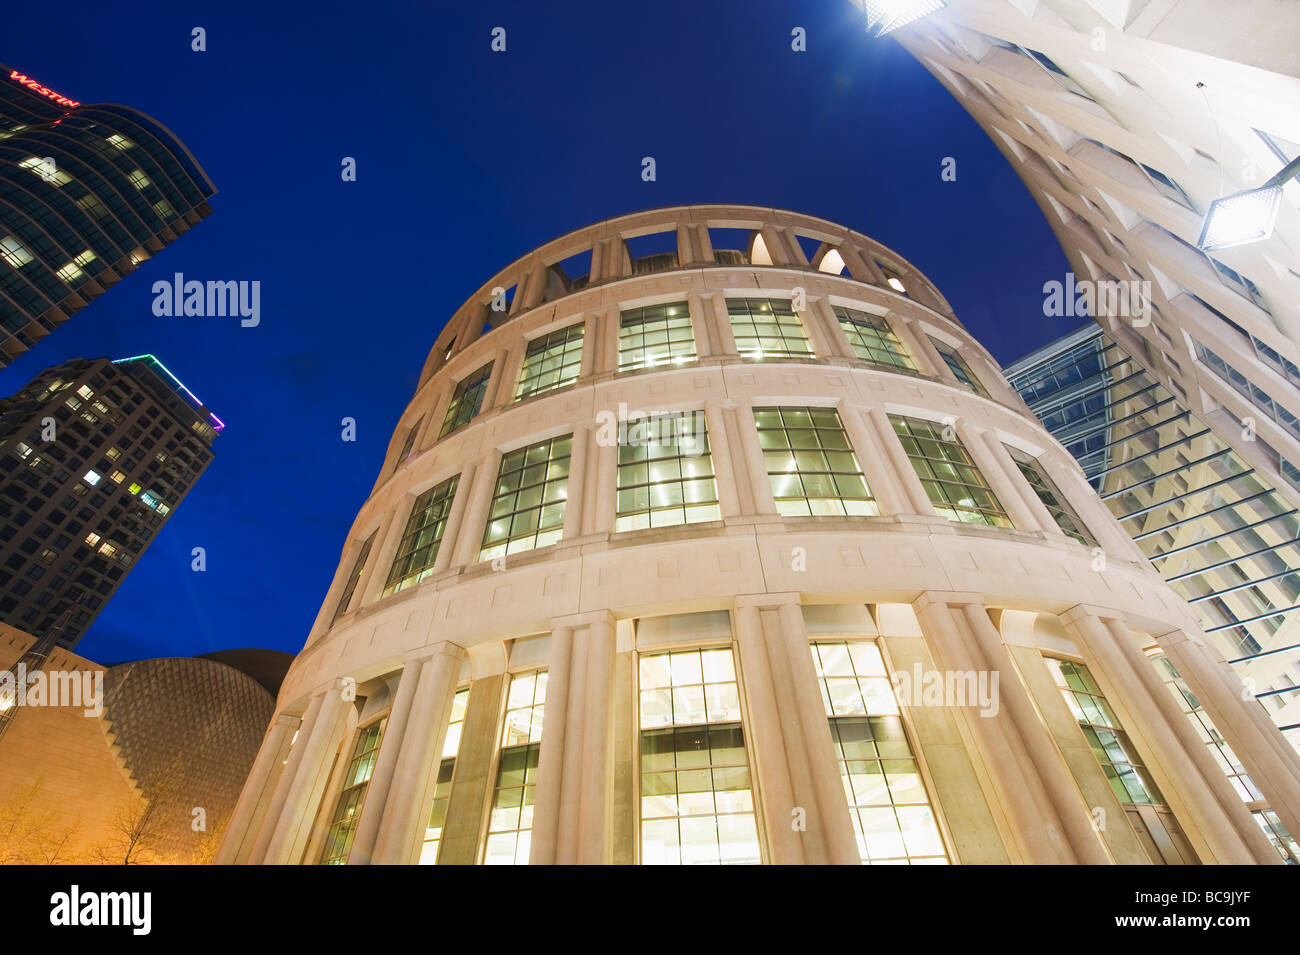 Vancouver Public Library designed by Moshe Safdie Vancouver British Columbia Canada Stock Photo